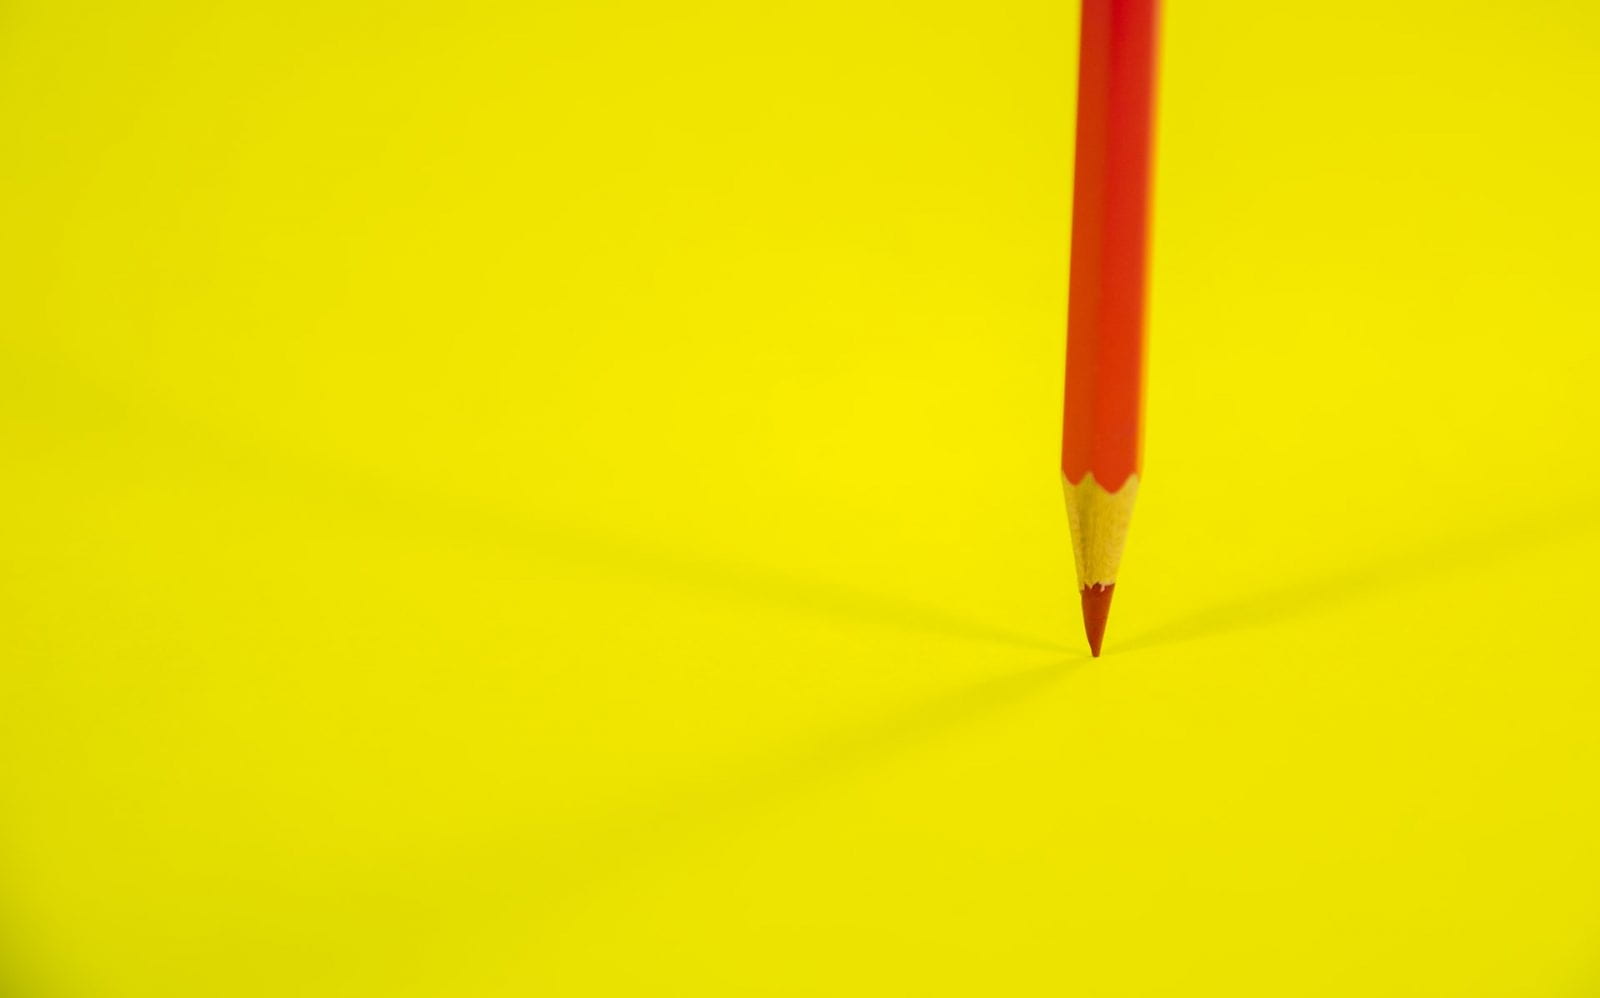 red pencil on yellow surface